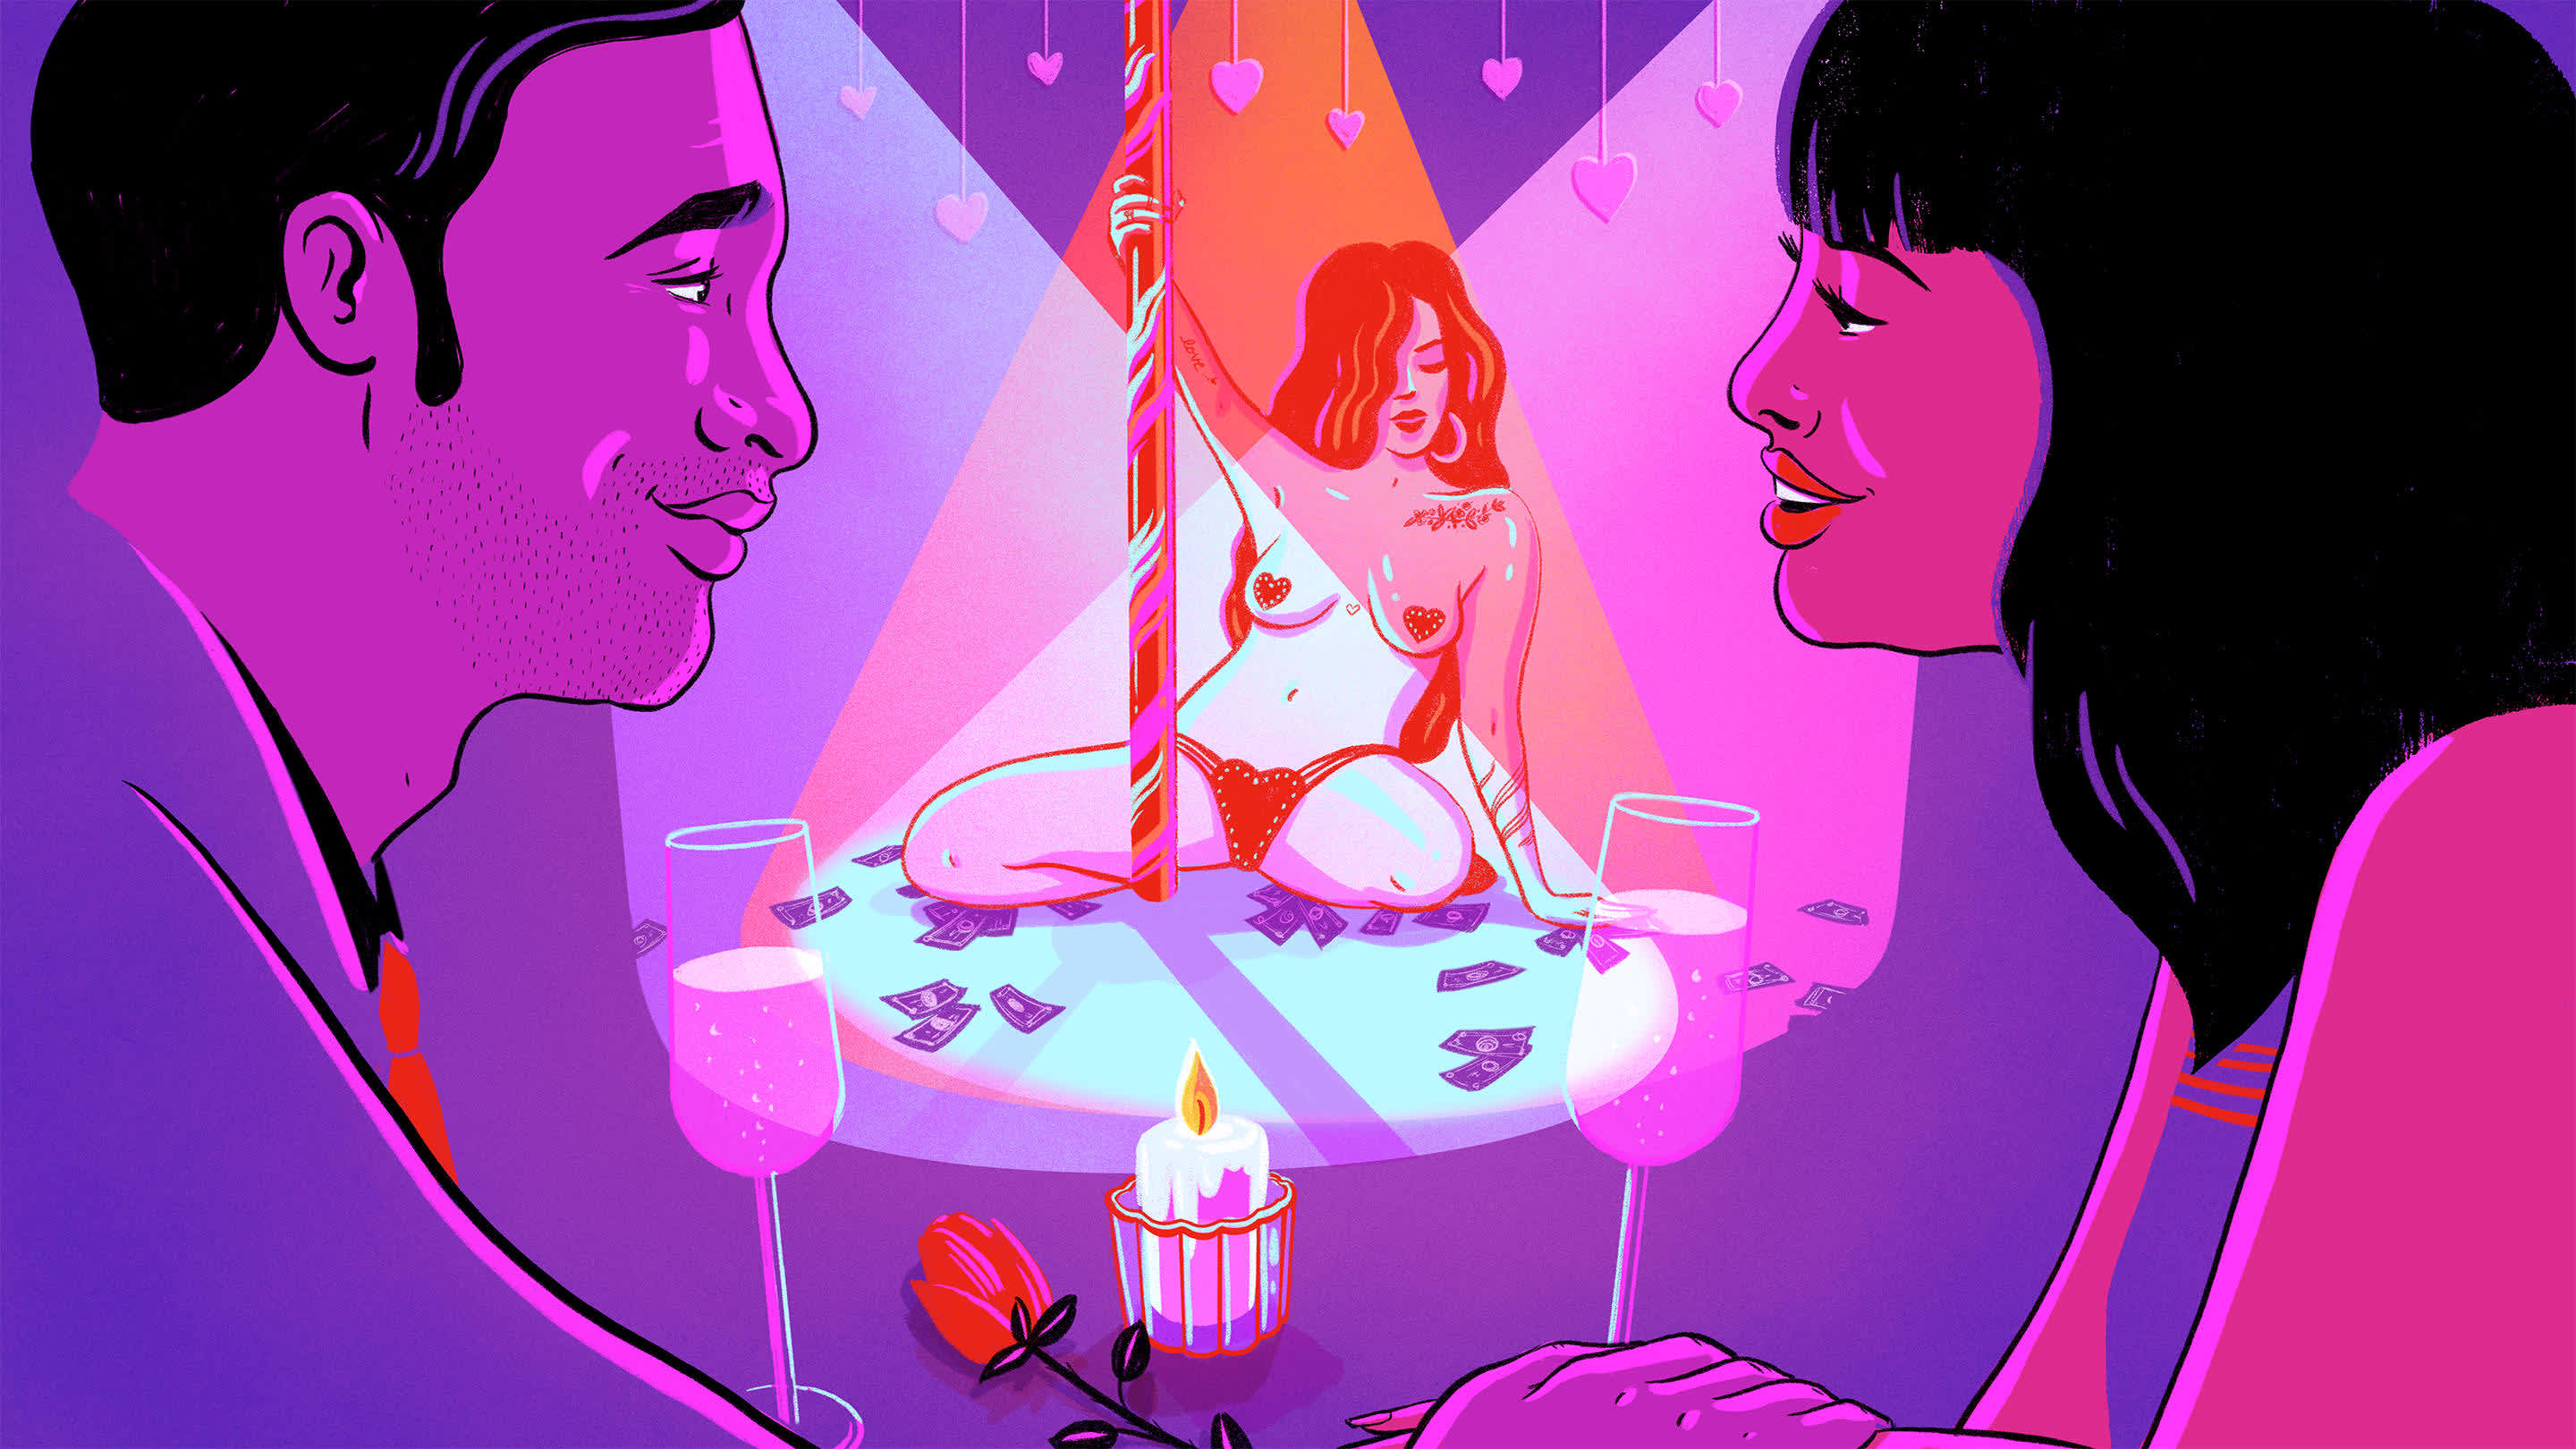 Strip Club Orgy - The Key to a Great Valentine's May Be Your Local Strip Club